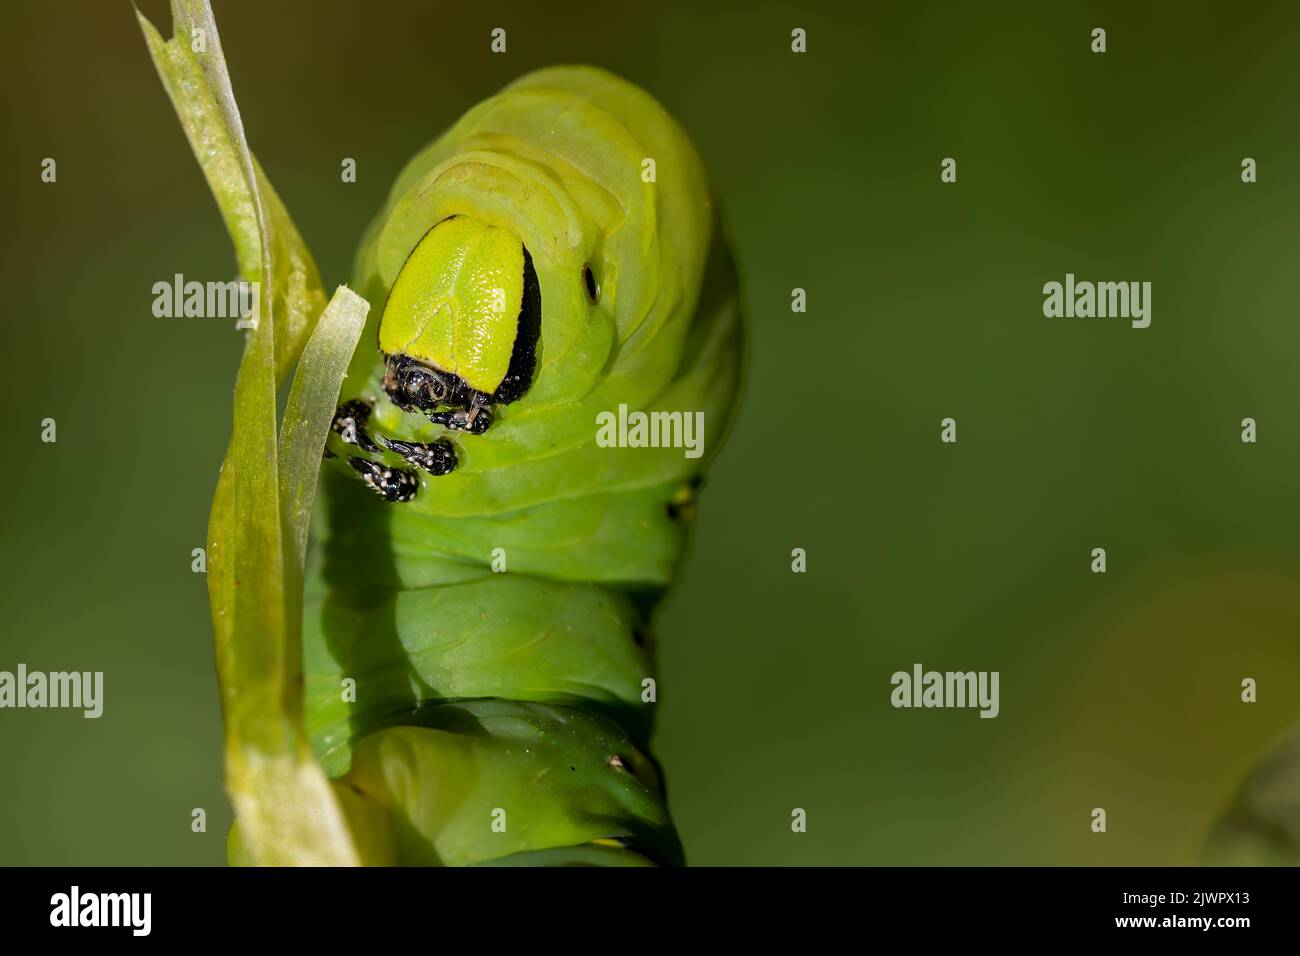 frontal view of an adult acherontia atropos caterpillar on a branch of a potato plant with green background. macro nature photograph in greenish tones Stock Photo